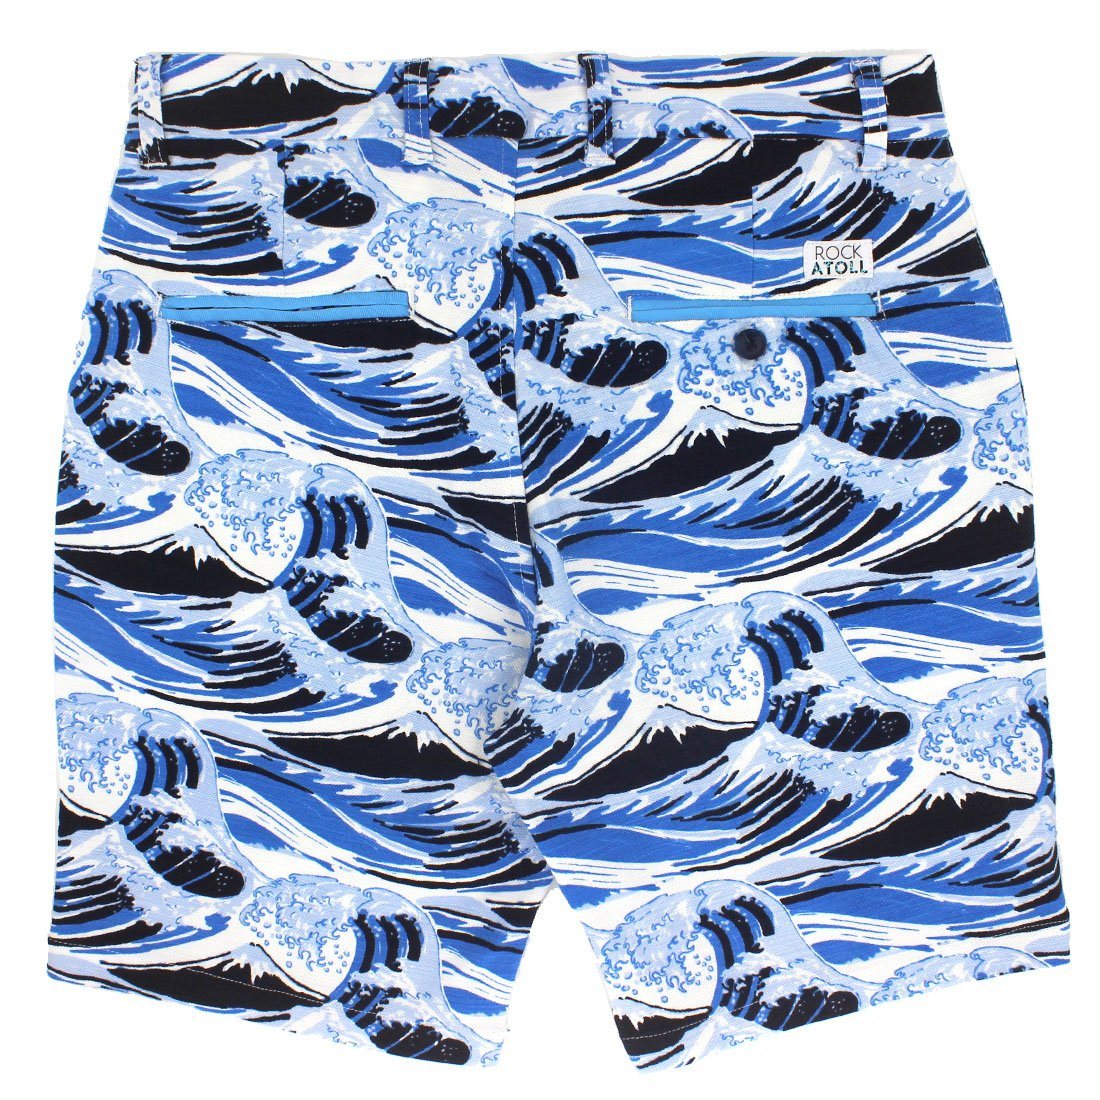 Japanese Wave Print Graphic Casual Wear Men's Shorts in Blue